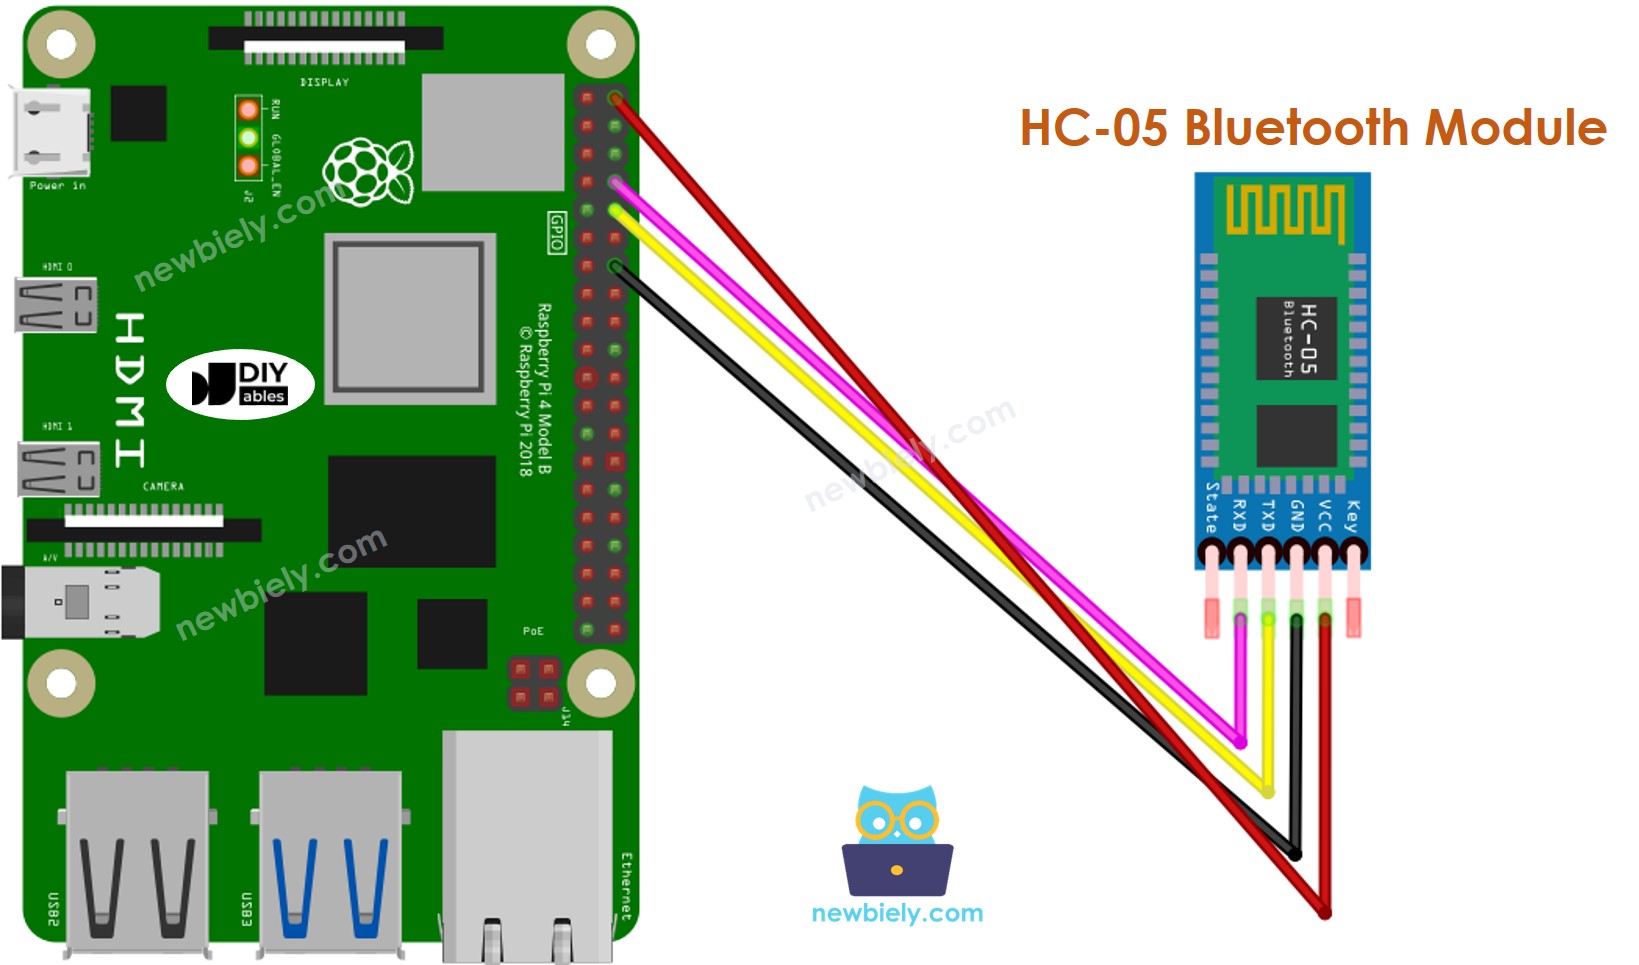 The wiring diagram between Raspberry Pi and Bluetooth